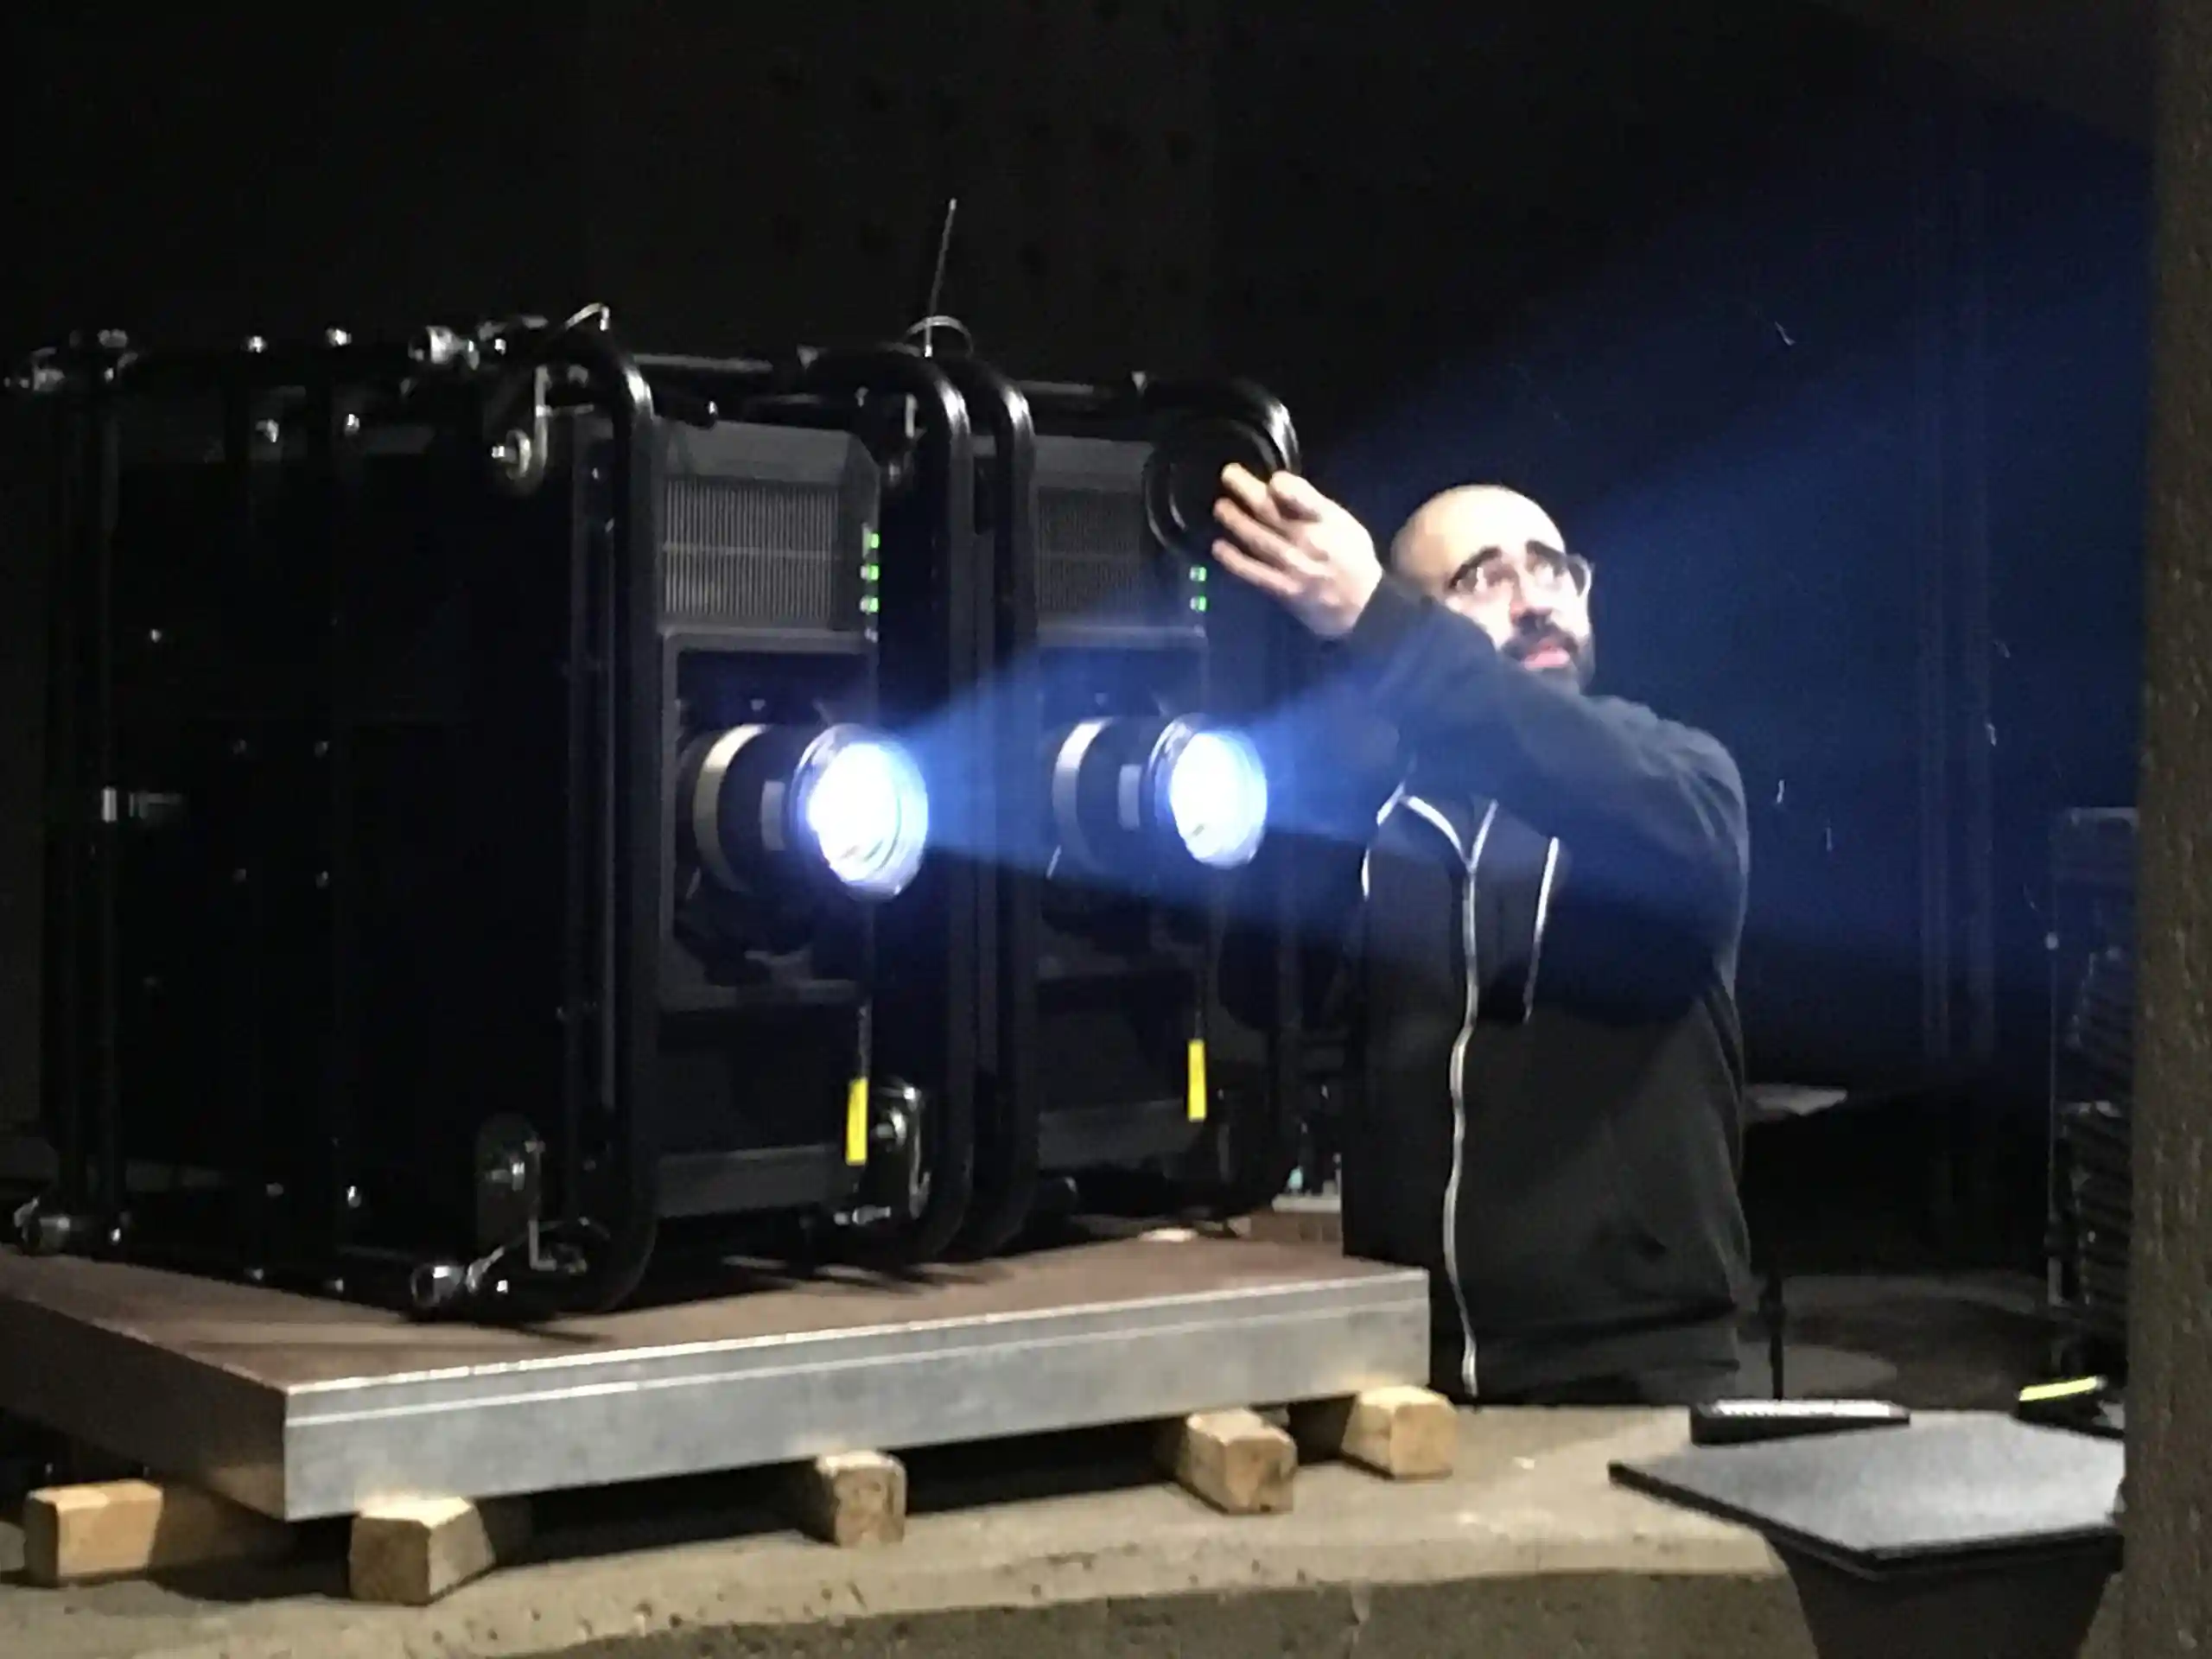 Emanuele Musca positioning the projectors for PHARUS